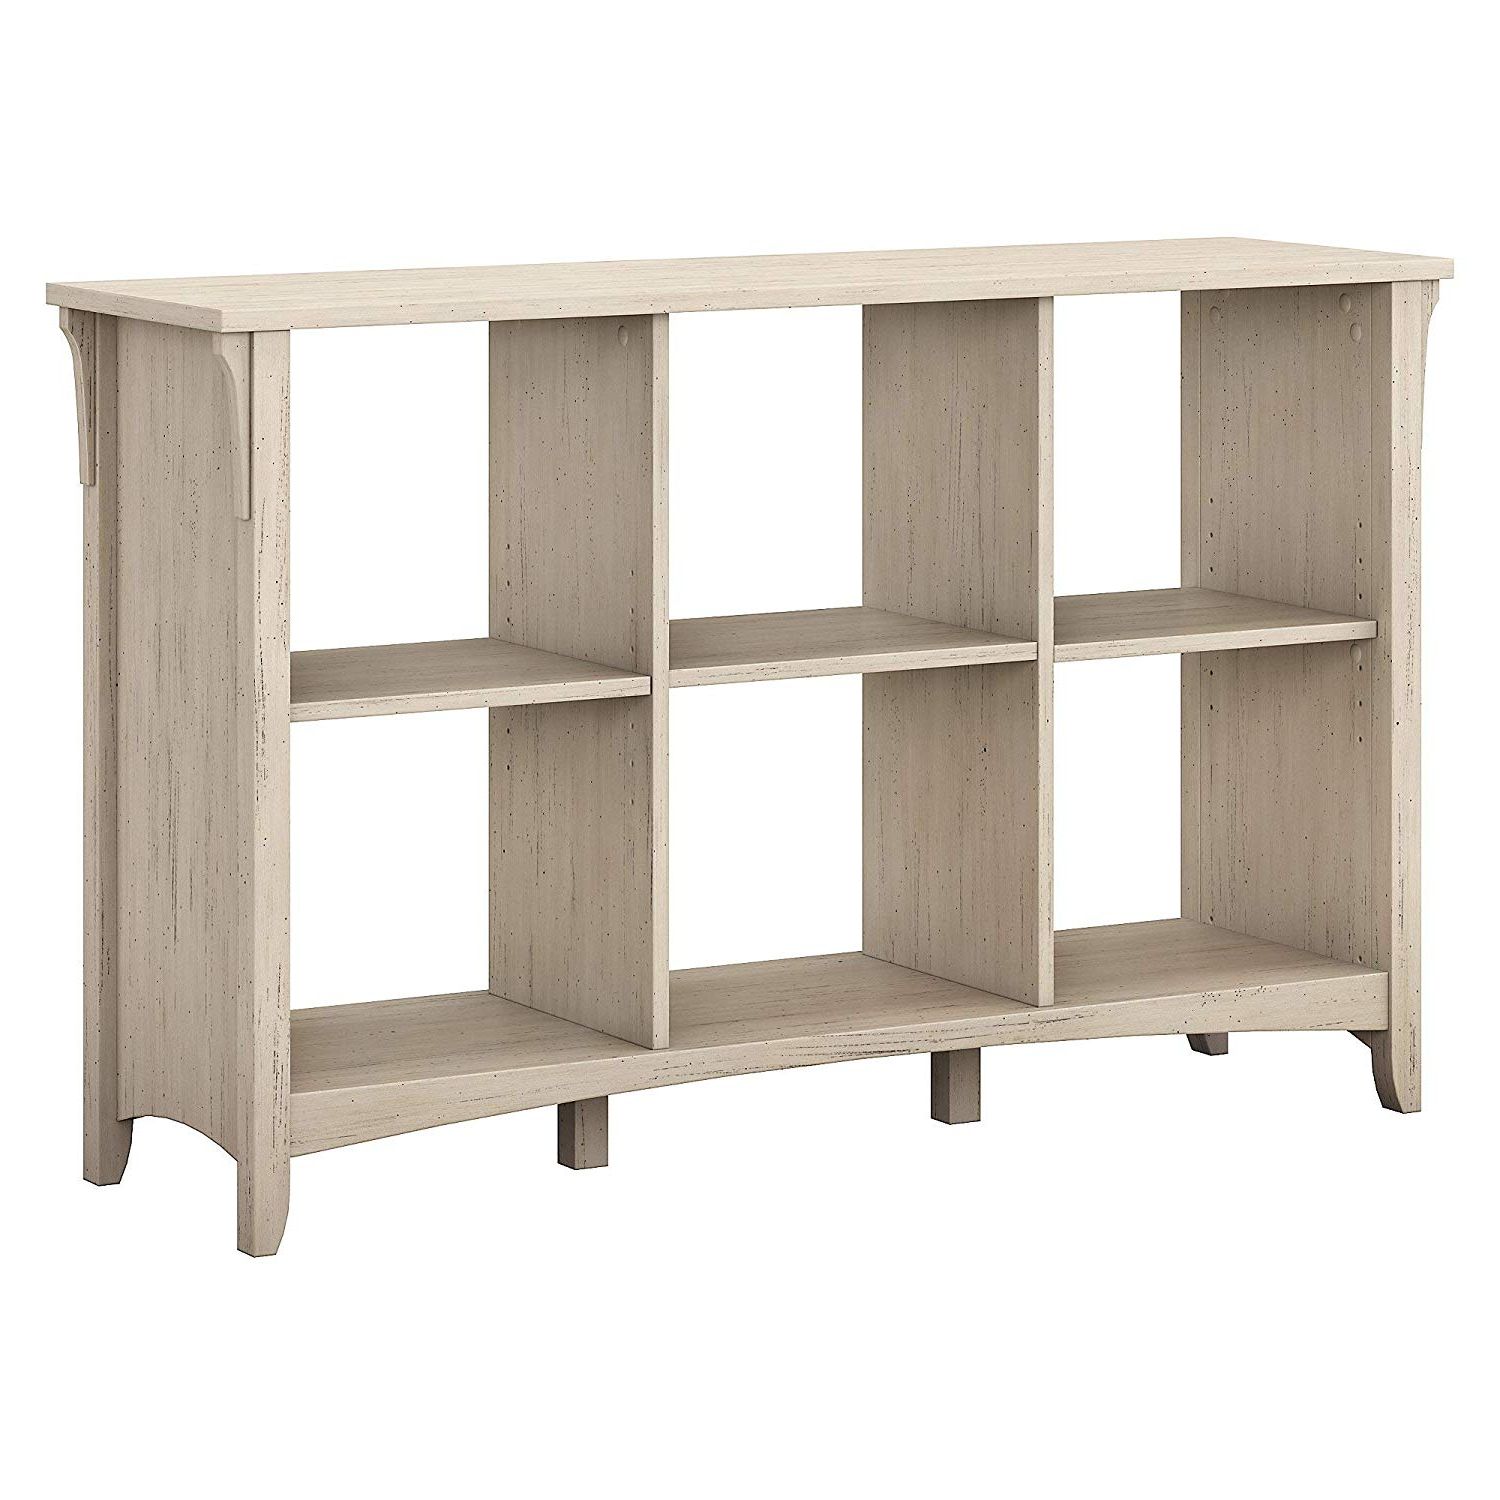 Widely Used Salina Cube Bookcases Regarding Bush Furniture Salinas 6 Cube Organizer In Antique White (View 2 of 20)